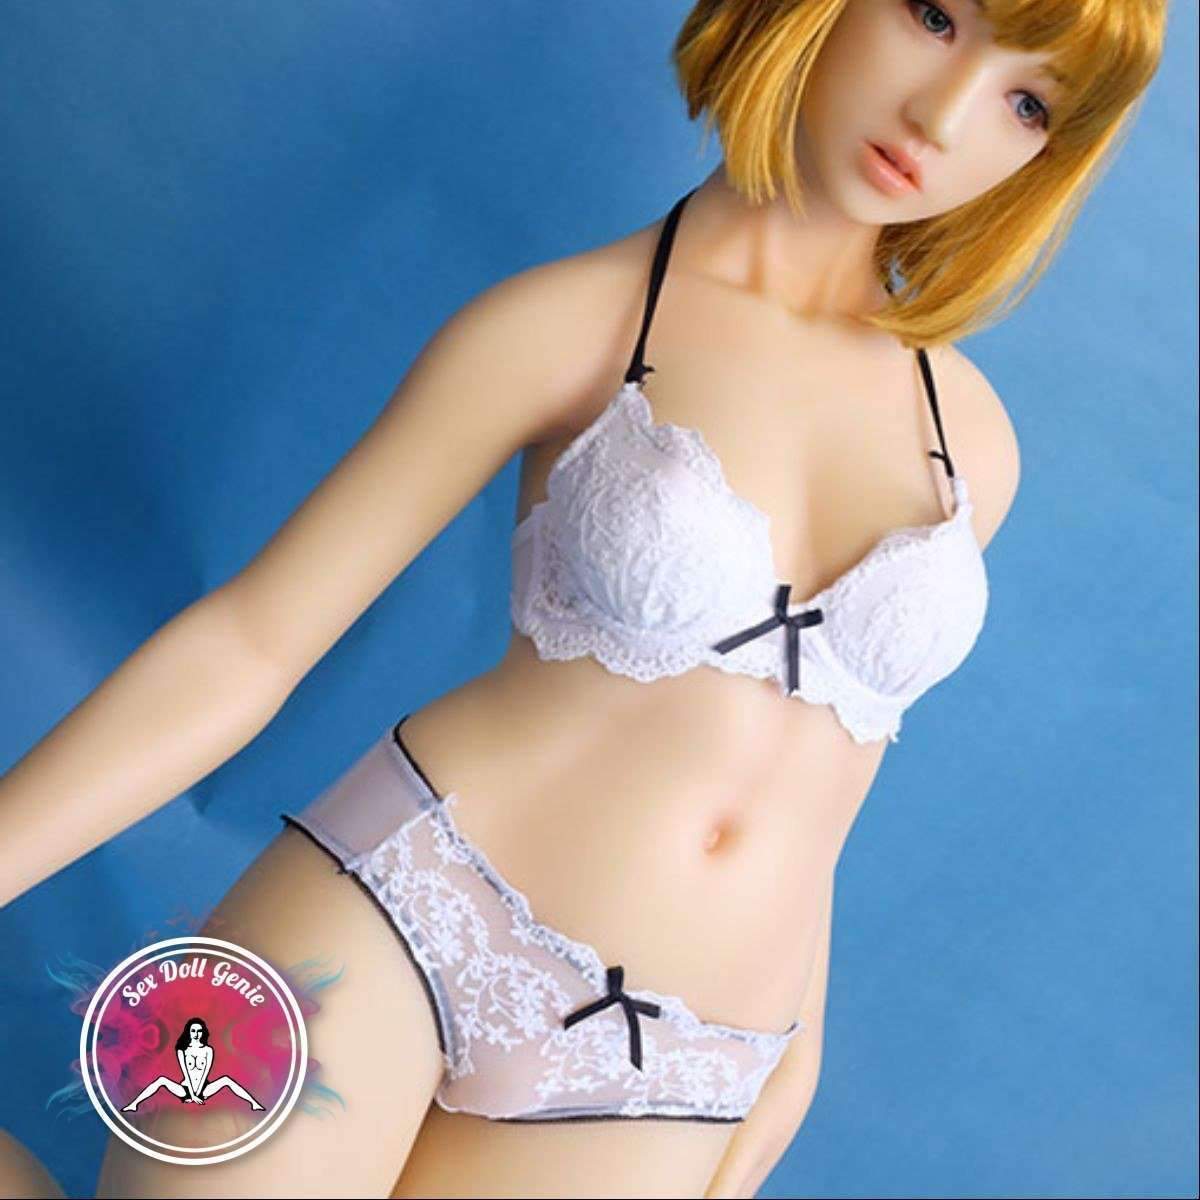 DS Doll - 158cm - Samantha (Elf) Head - Type 2 D Cup Silicone Doll-8